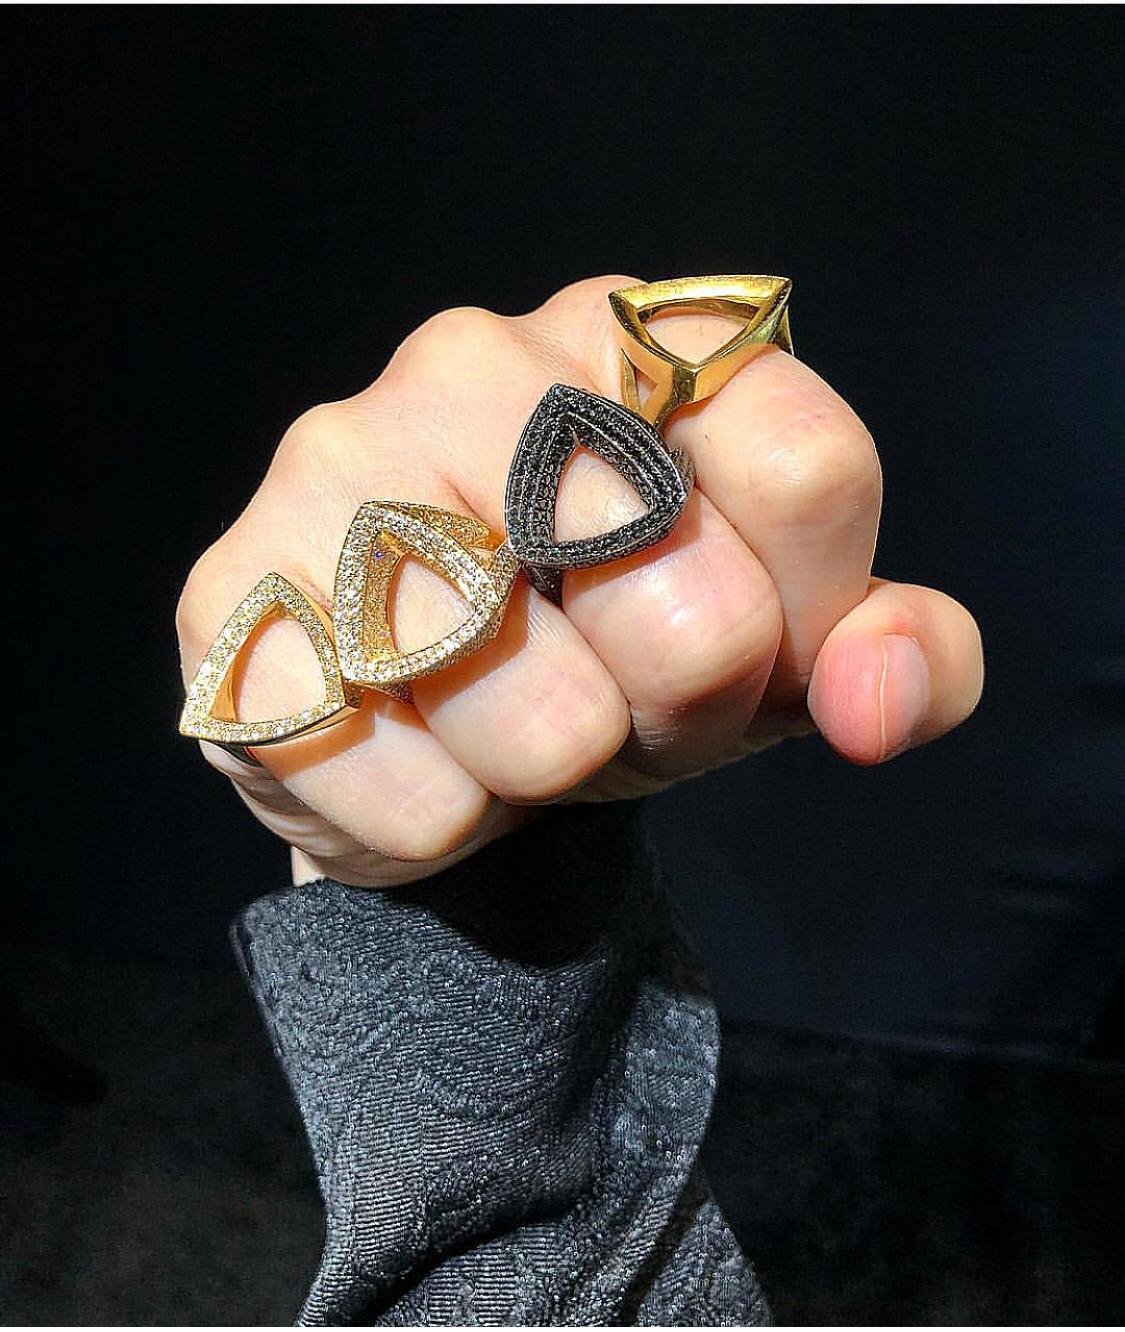 Black Diamonds to The Power of Three...  This Geometric Trilogy Ring is a large three dimensional beveled triangle set on rounded gold band covered in Pave Black Diamonds.

** PRICE for SIZE 7 
Contact Us for Other Sizes, Price Varies by Size
Other